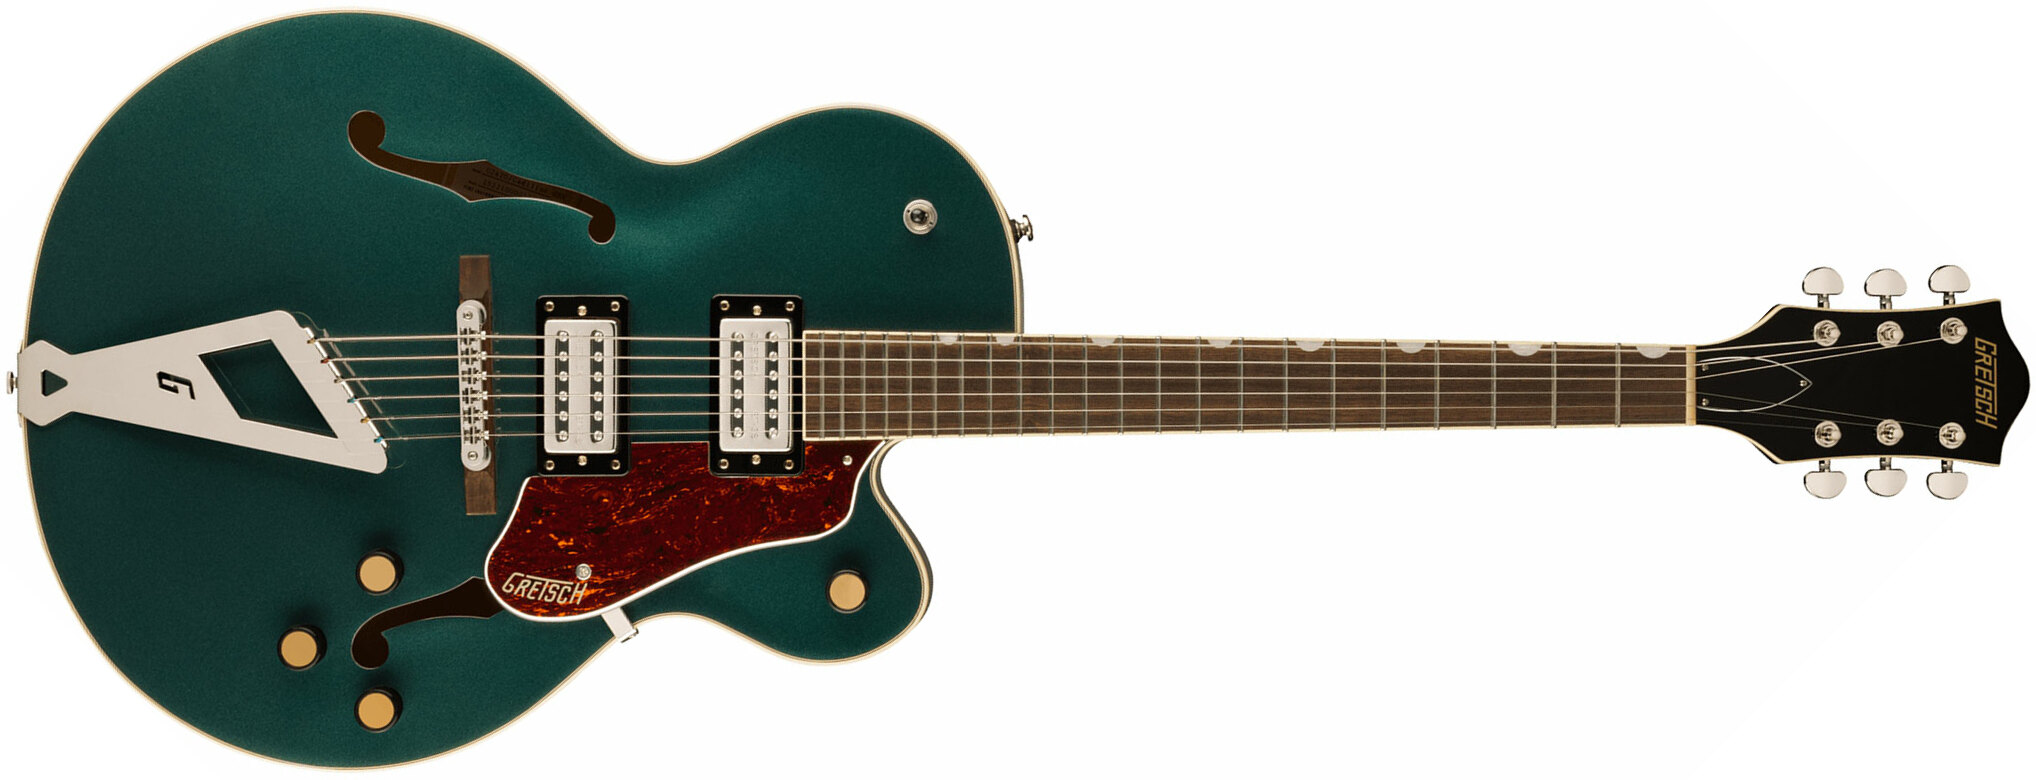 Gretsch G2420 Streamliner Hollow Body With Chromatic Ii 2h Ht Lau - Cadillac Green - Hollowbody E-Gitarre - Main picture